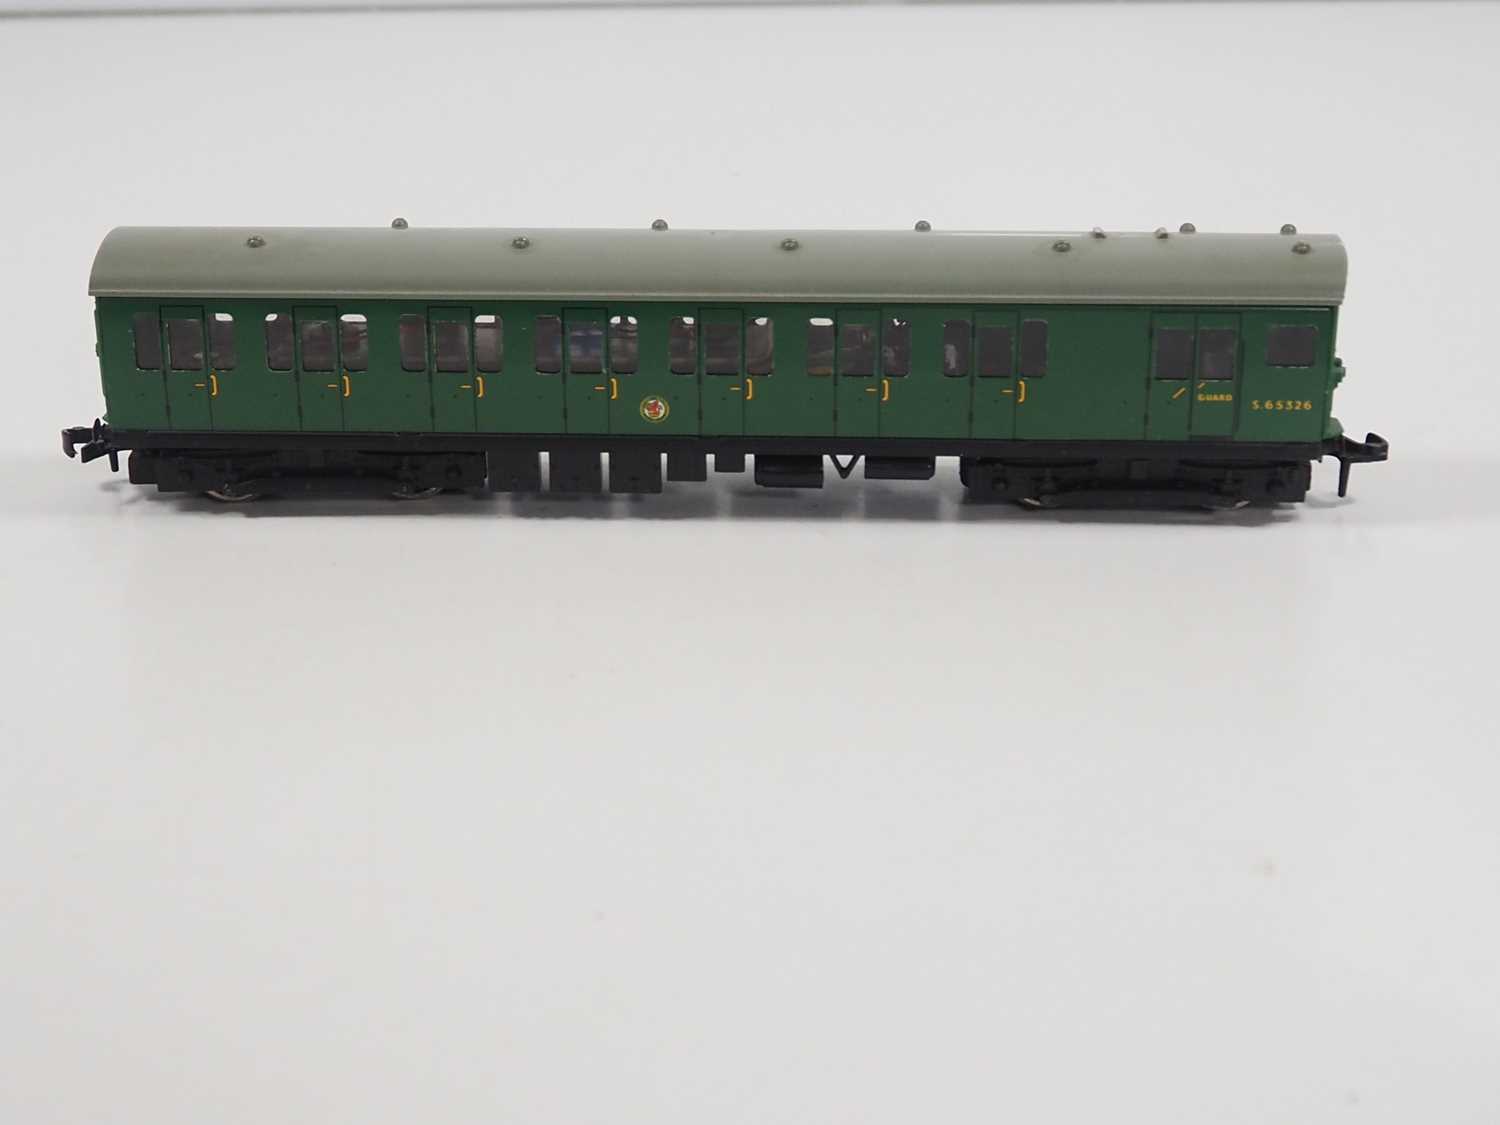 A HORNBY DUBLO 3250/4150 3-rail OO gauge BR(S) Electric Motor Coach with Driving Trailer 2 car EMU - Image 7 of 9